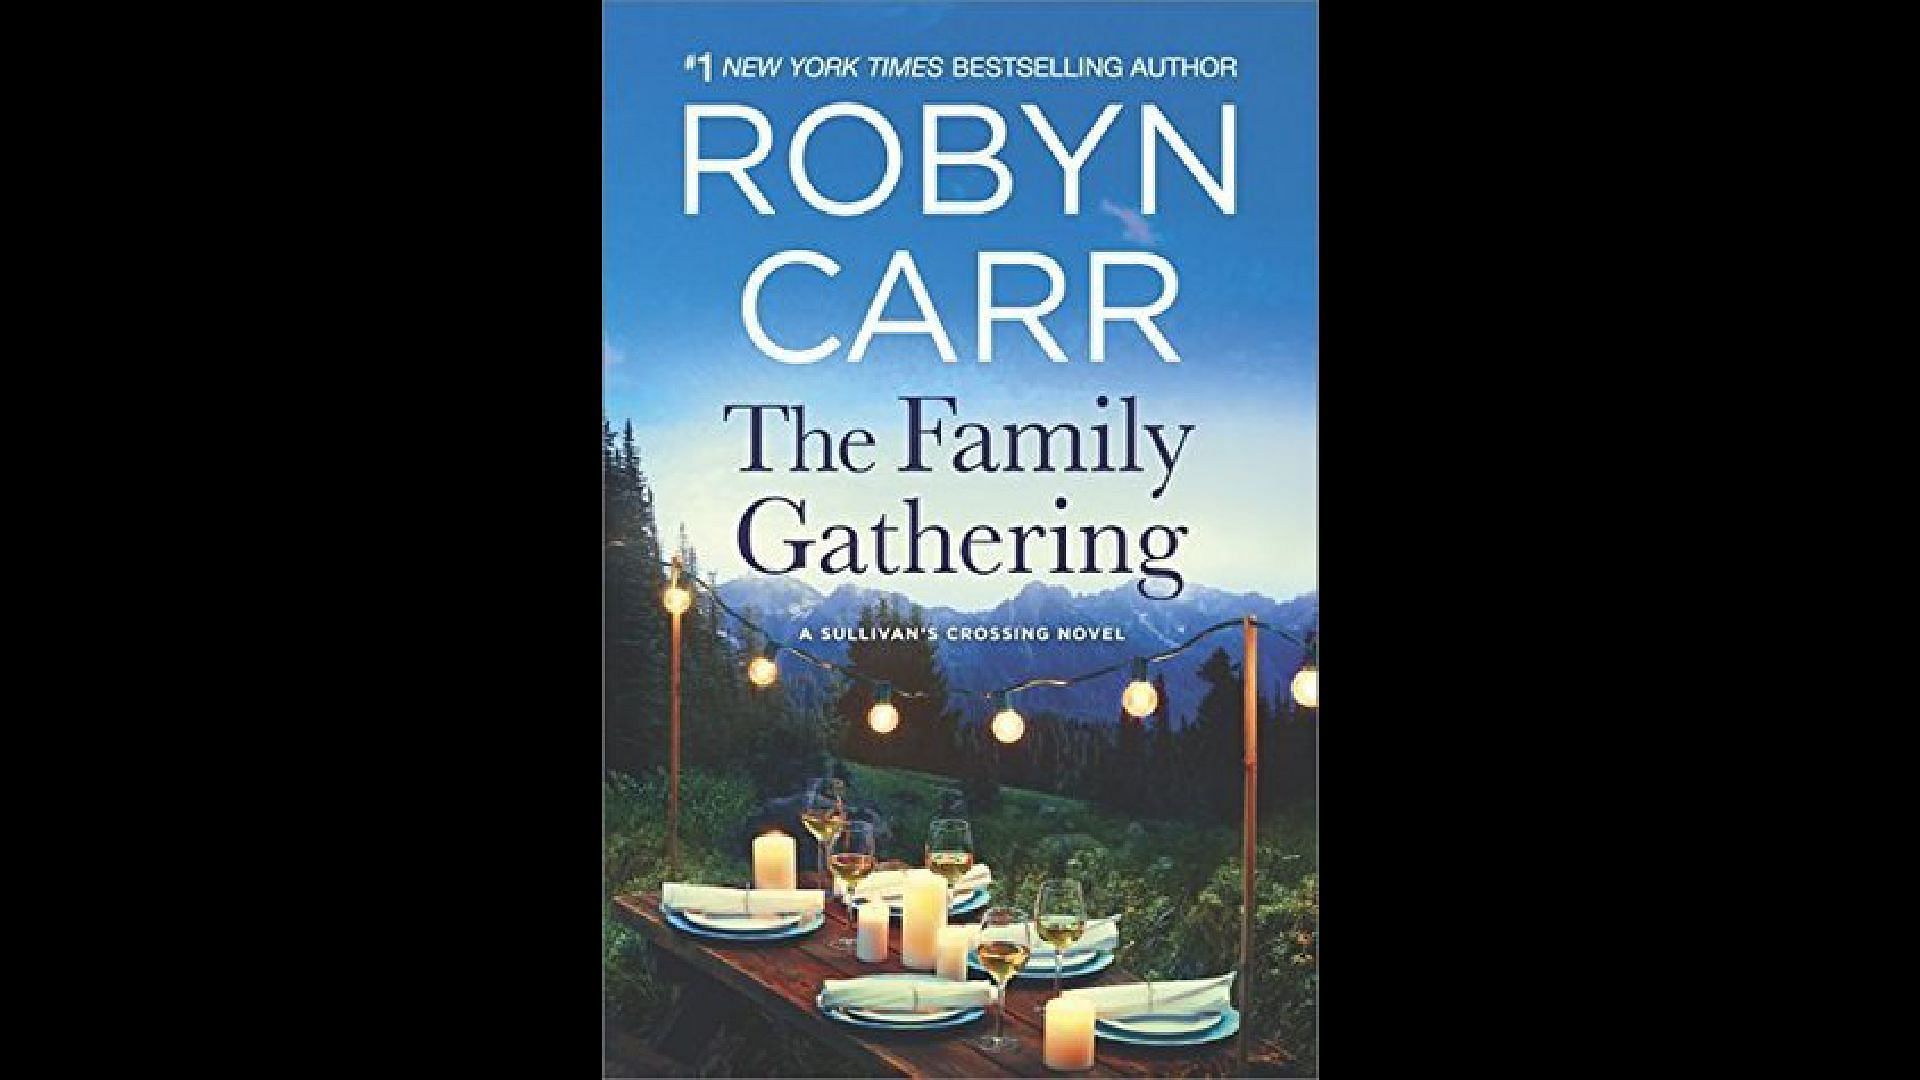 Robyn Carr&#039;s The Family Gathering (Image via Goodreads)